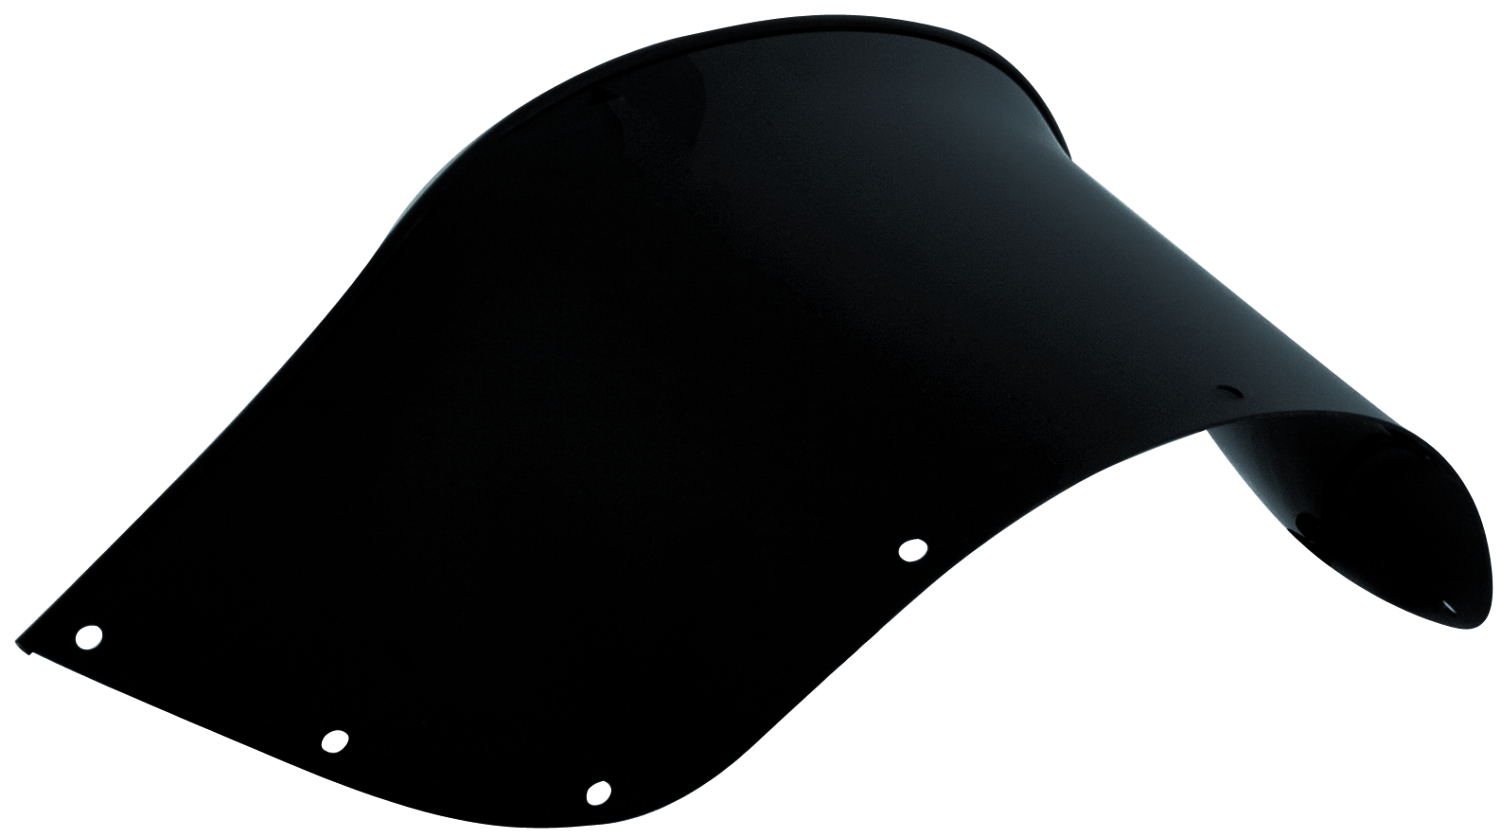 Kimpex Polycarbonate Windshield 06-223